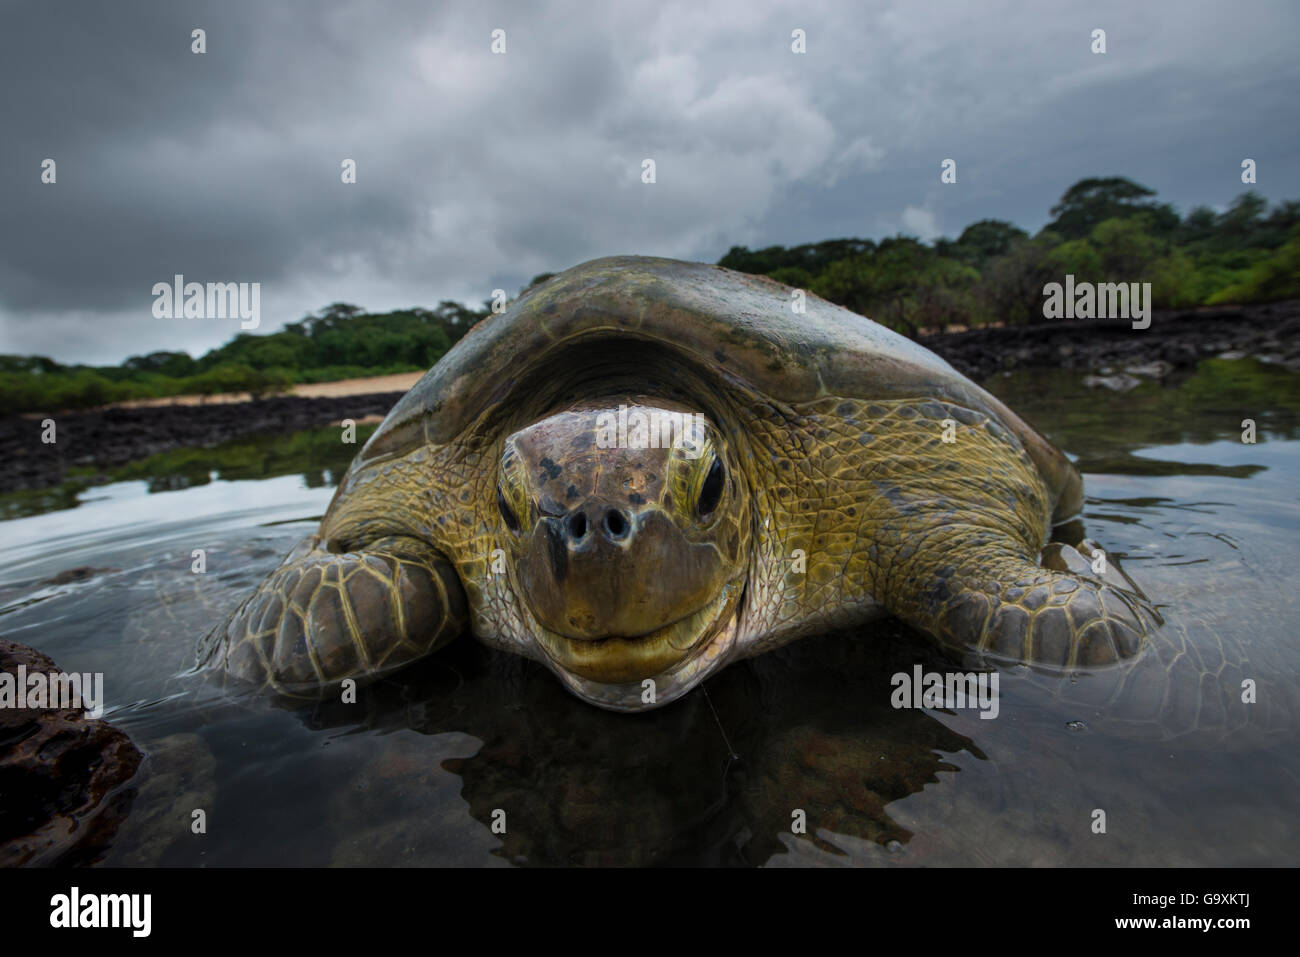 Green turtle (Chelonia mydas) resting in the shallows of the coast, Bijagos Islands, Guinea Bissau. Endangered species. Stock Photo